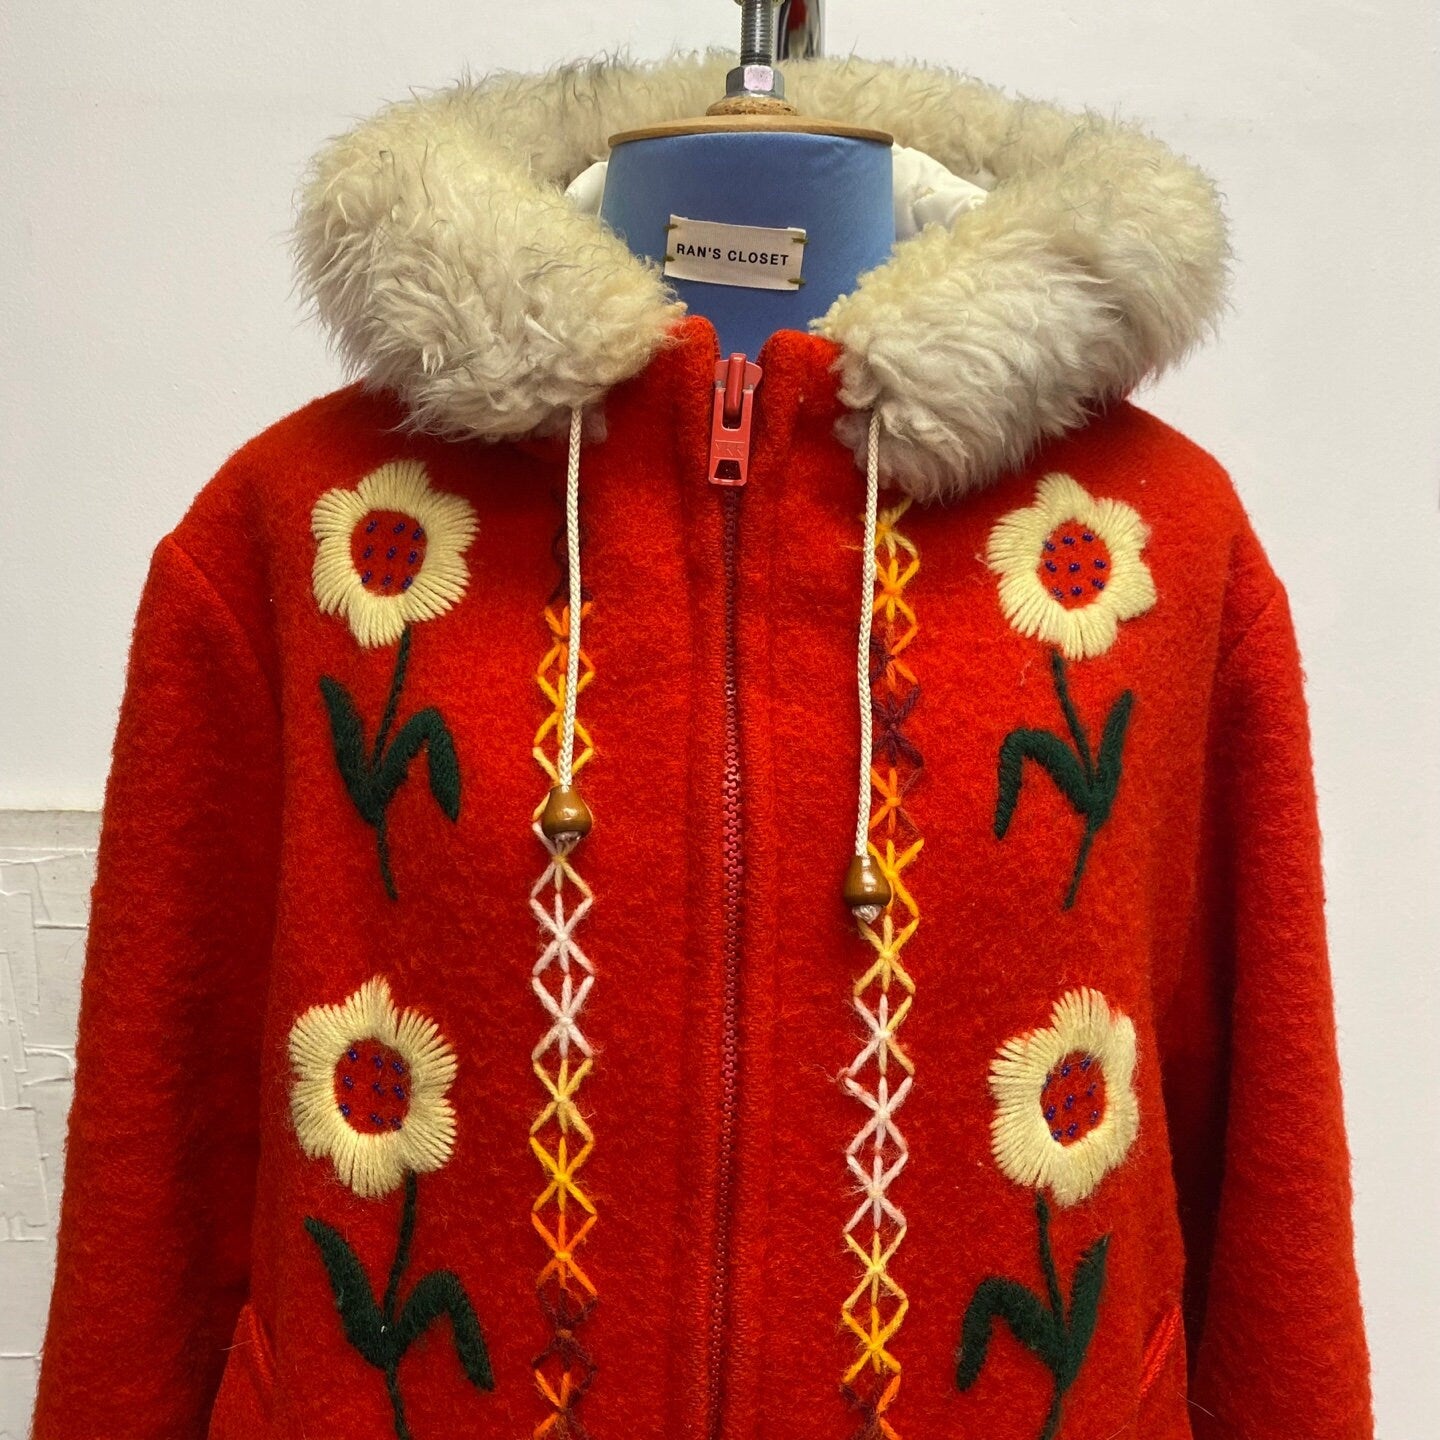 Vintage Ruby Red Hudson's Bay Wool Parka with Fur Lined Hood | Vintage Winter Parka | Flower Pattern | Quilted Lining | 100% Wool | M-3068